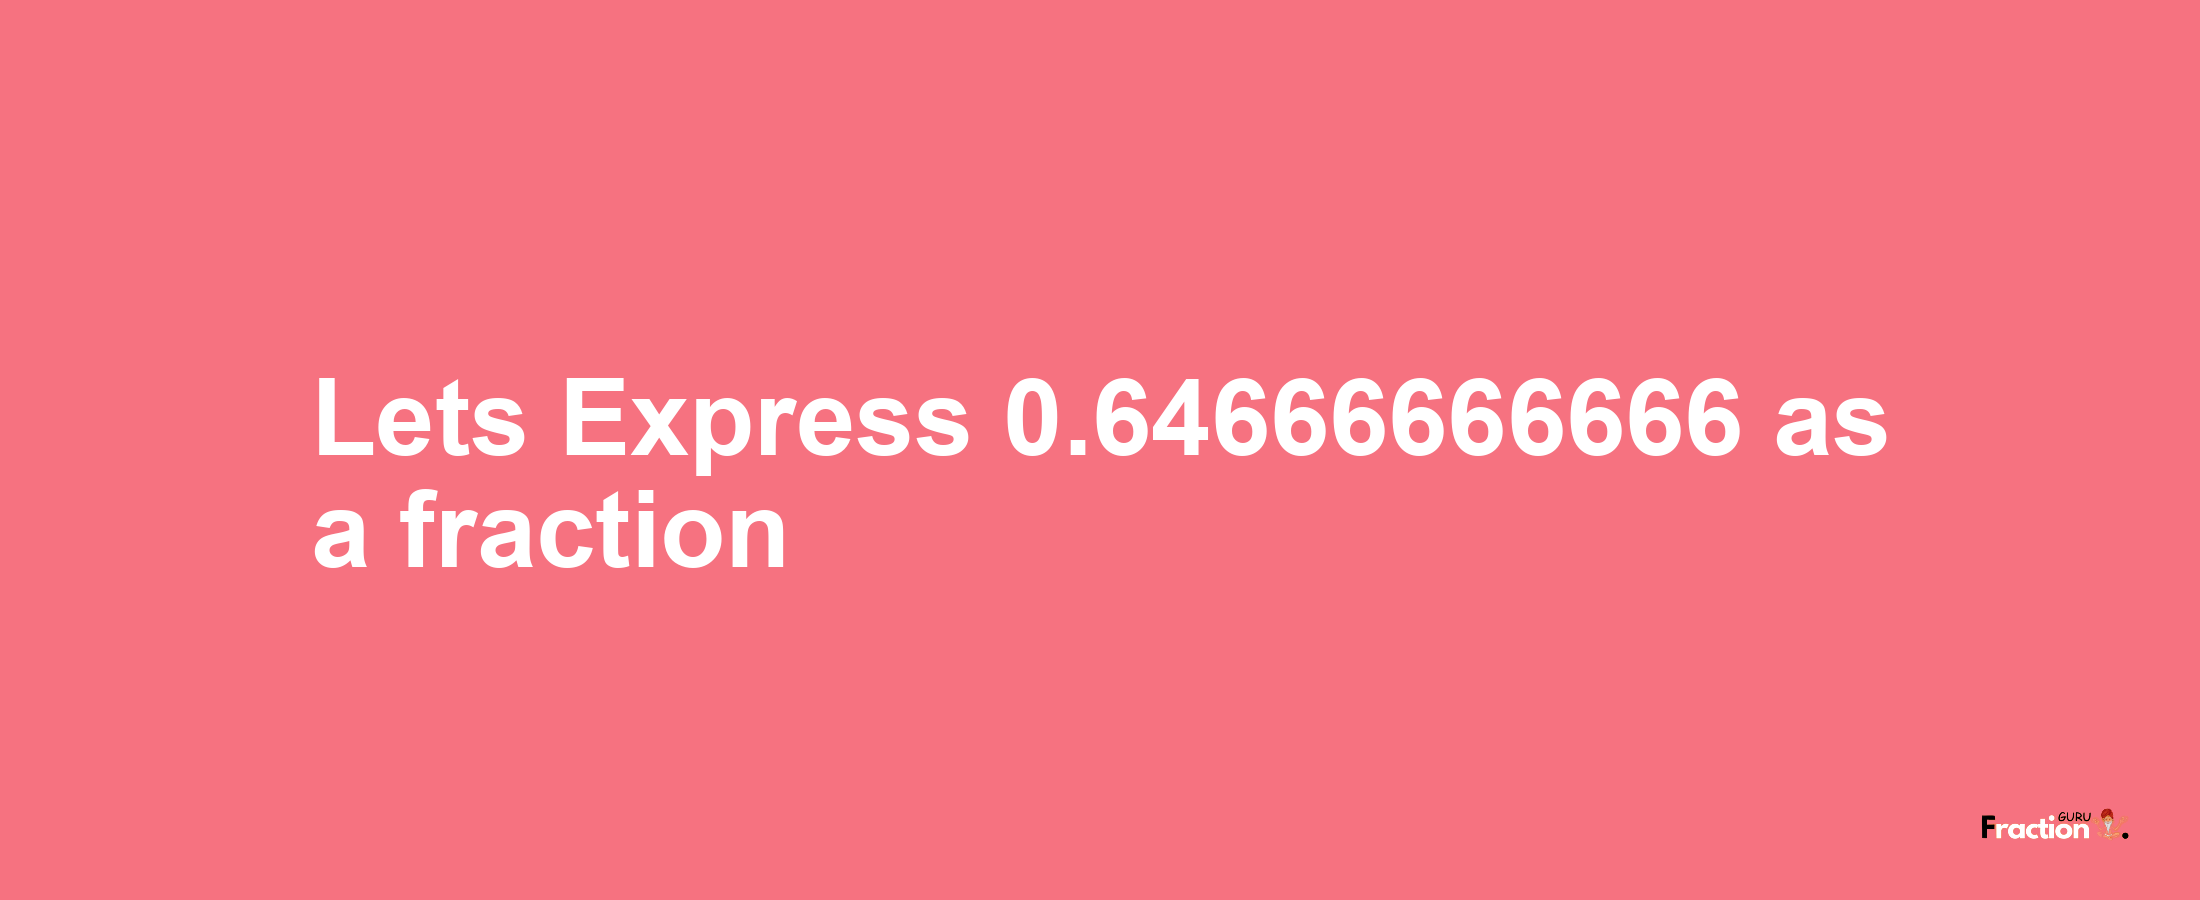 Lets Express 0.64666666666 as afraction